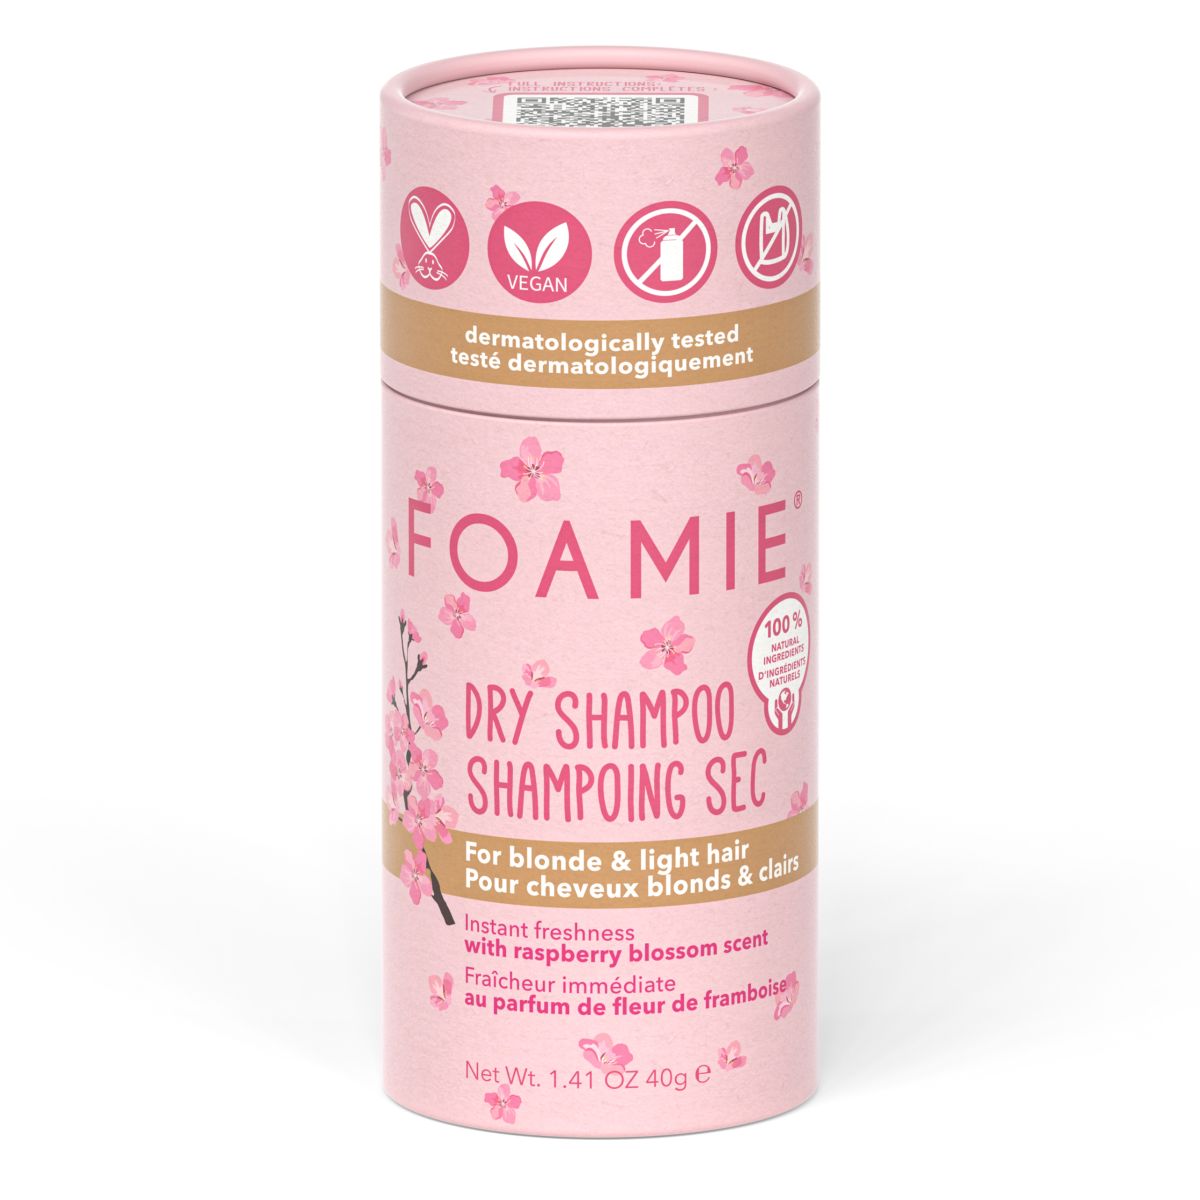 FOAMIE Dry shampoo in powder form – Berry Blonde, for light hair.